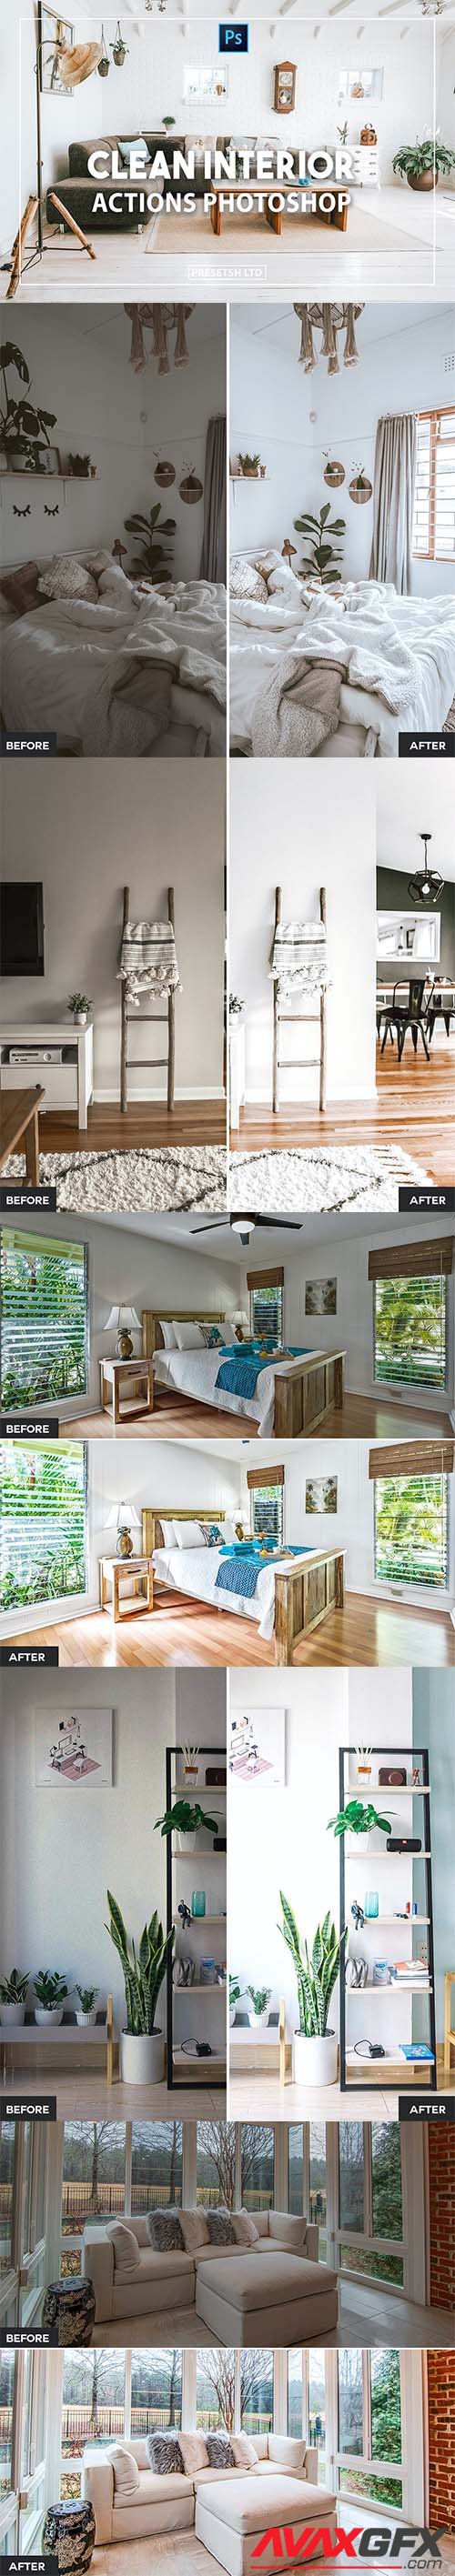 Clean Interior Photoshop Actions